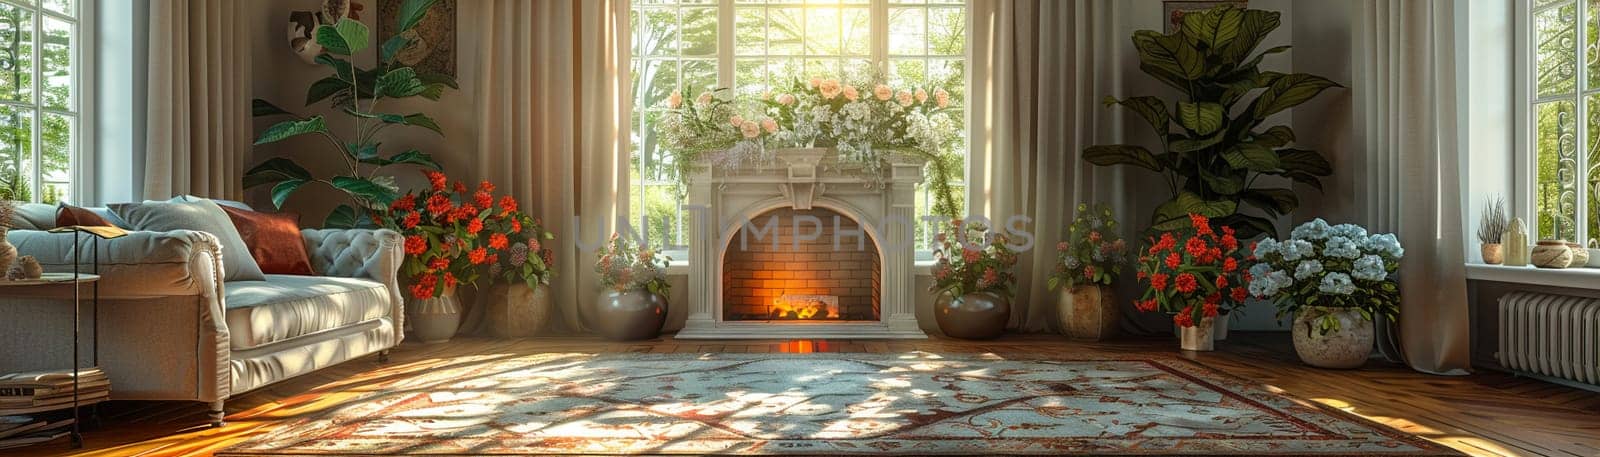 Traditional English cottage living room with floral patterns and cozy fireplace3D render.